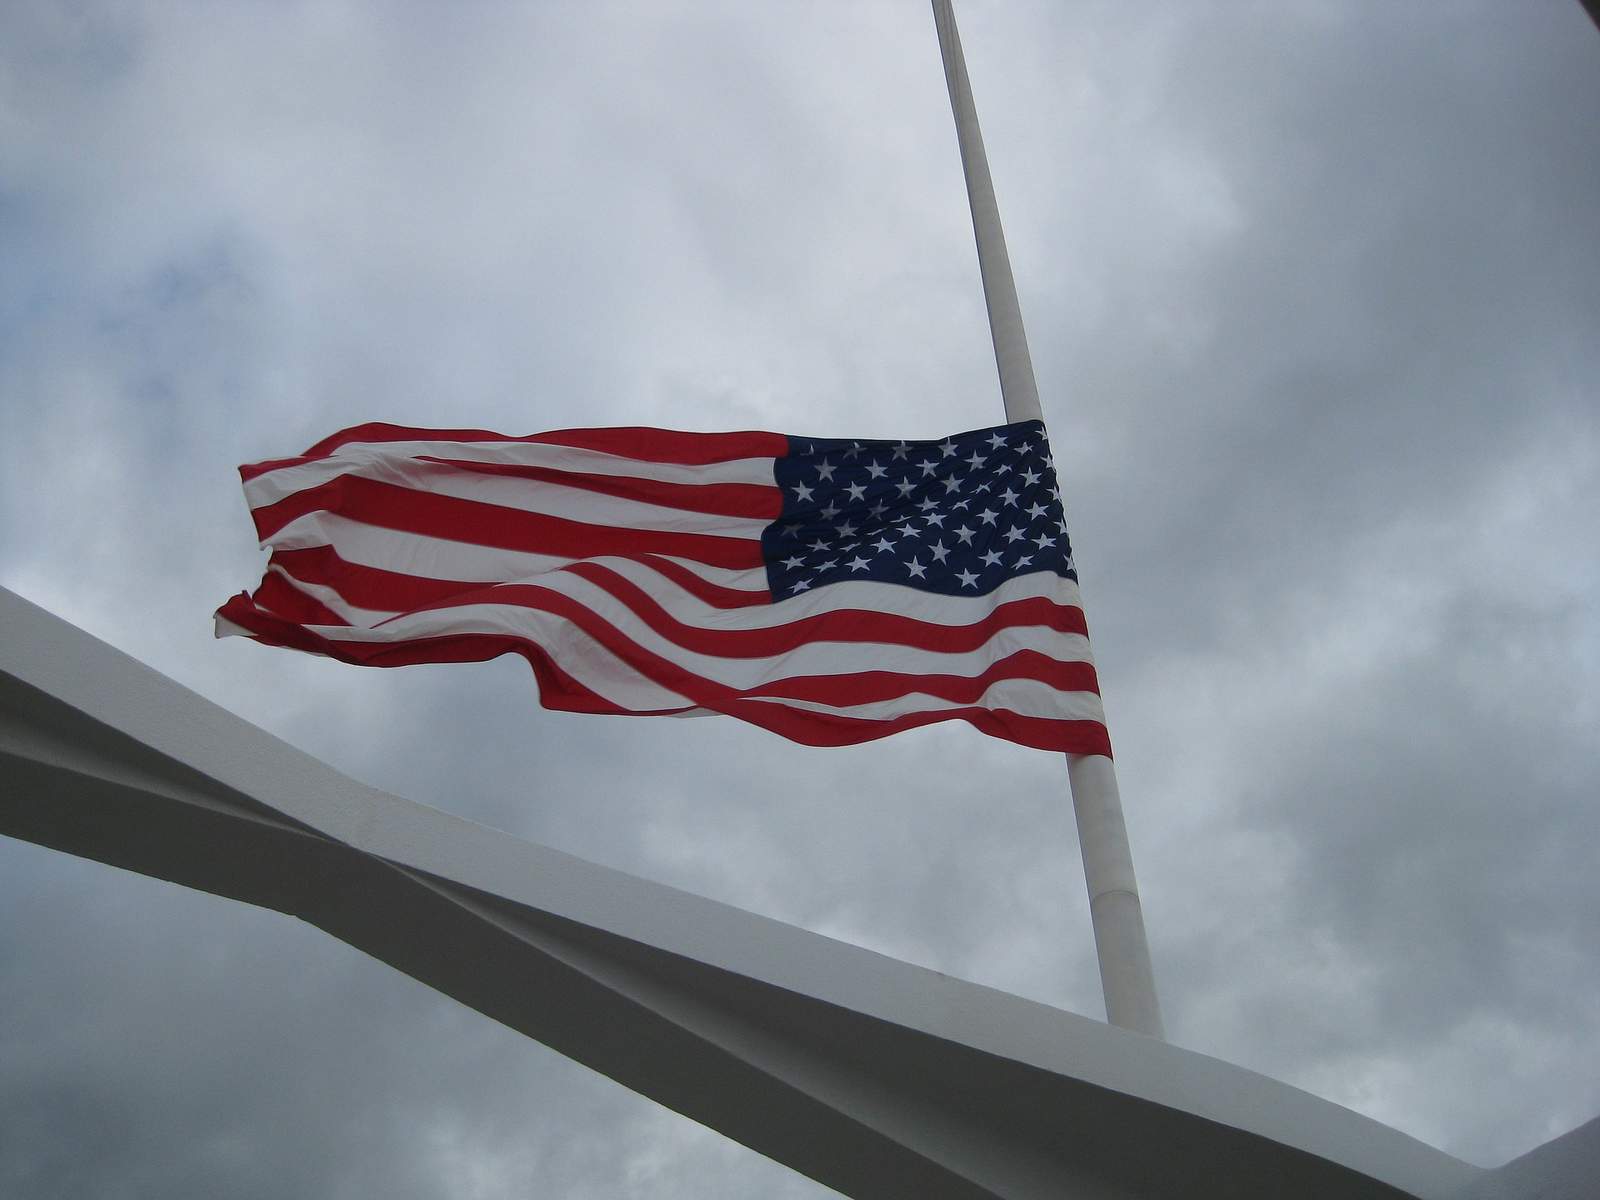 Michigan governor directs flags to remain lowered for Memorial Day